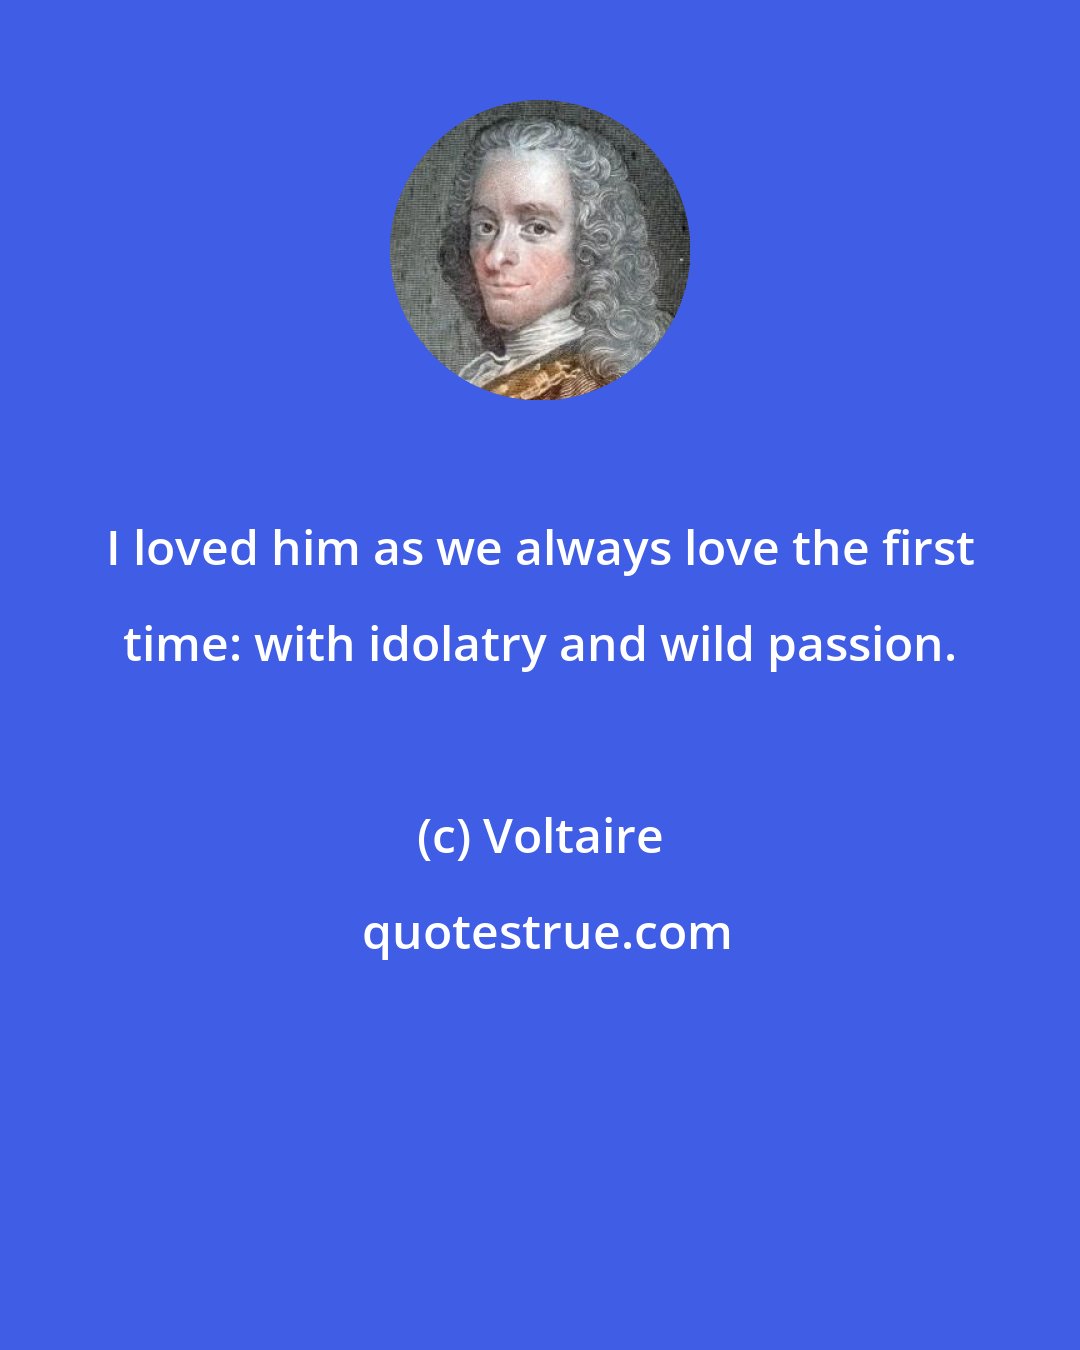 Voltaire: I loved him as we always love the first time: with idolatry and wild passion.